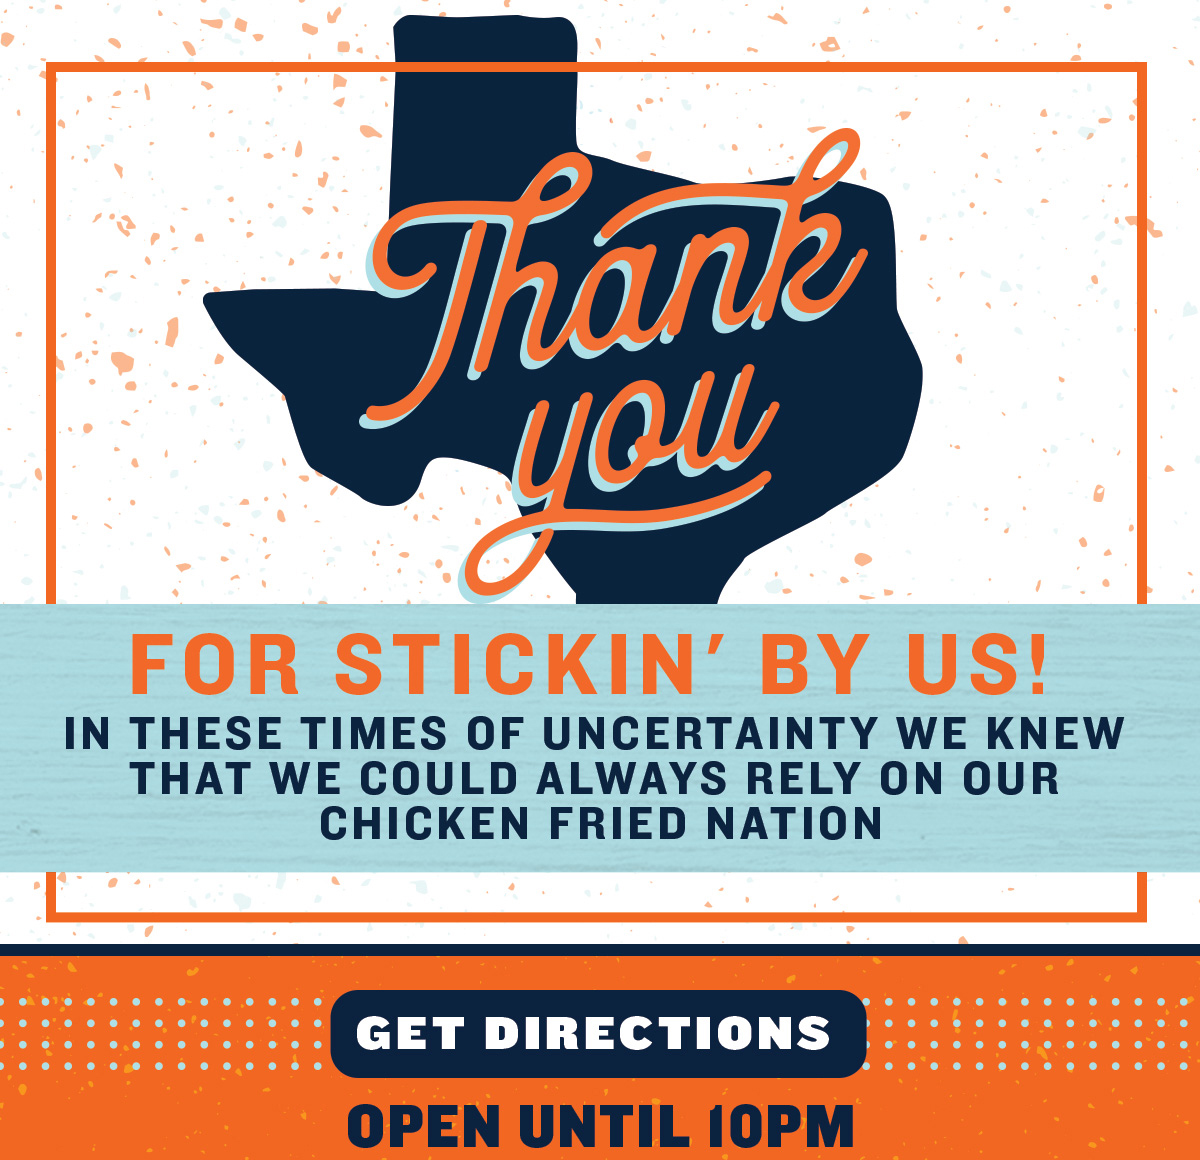 Thank you for stickin'' by us! In these times of uncertainty we knew that we could always rely on our Chicken Fried Nation